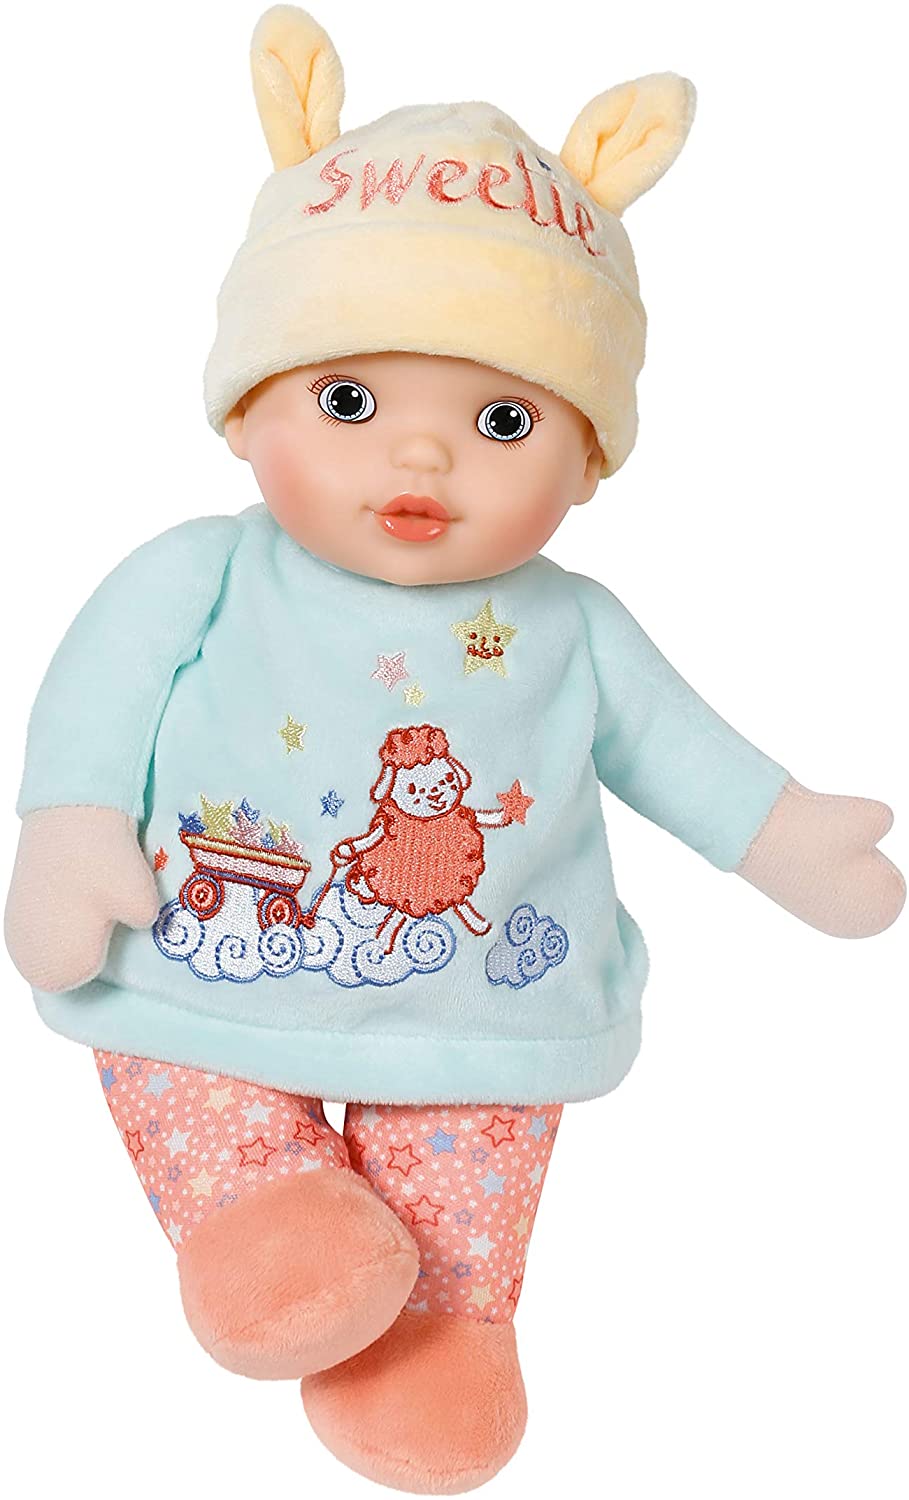 Vier heel fijn revolutie Zapf Creation Baby Annabell Sweetie 30 cm Doll – Small & Soft – Easy for  Small Hands, Creative Play Promotes Empathy & Social Skills, For Babies  0-12 Months – Includes Integrated Rattle & More – TopToy